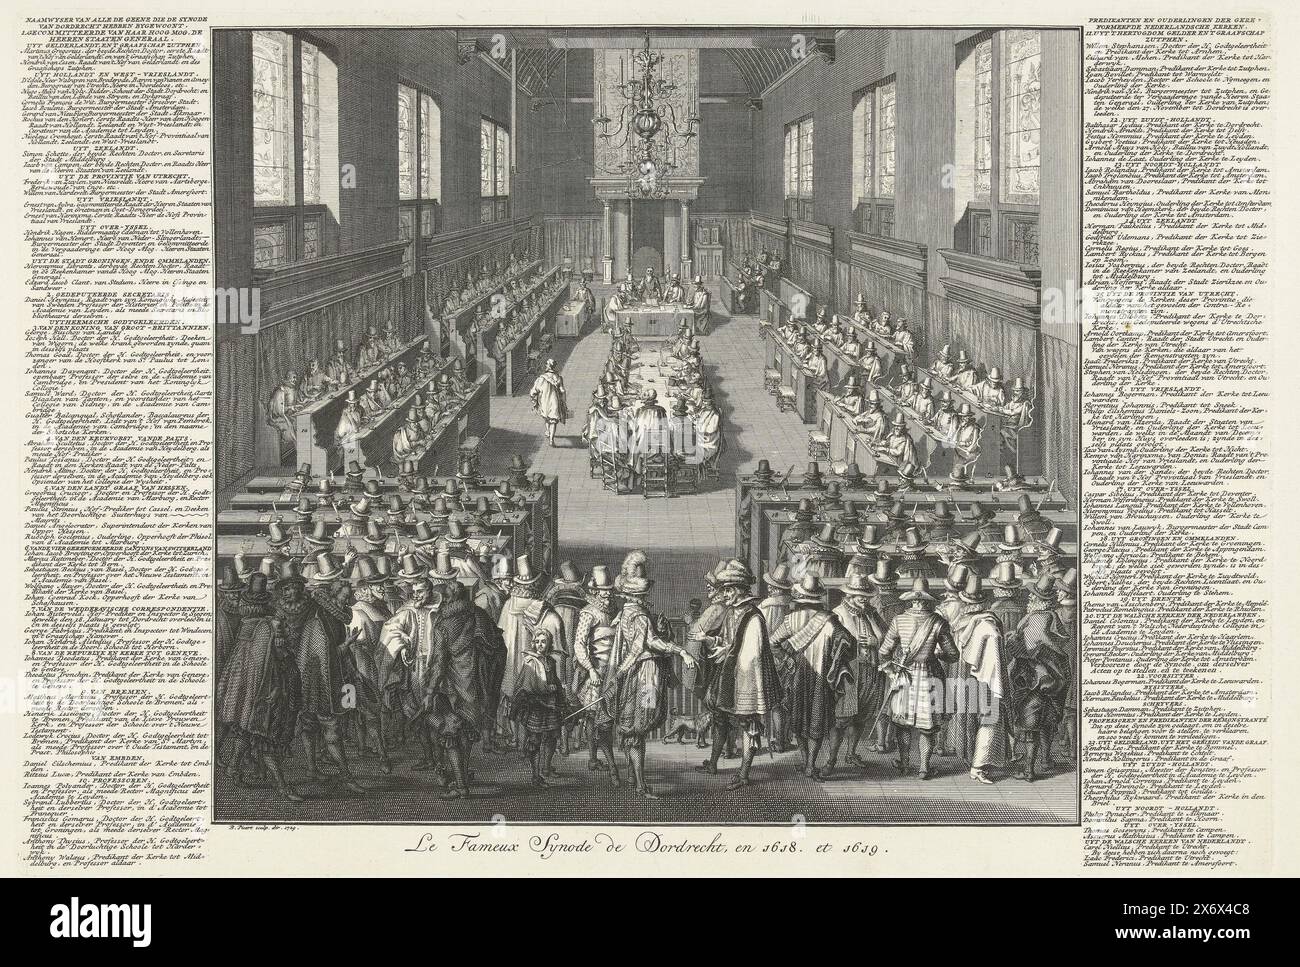 Opening of the synod of Dordrecht, 1618, Le Fameux Synode de Dordrecht, en 1618. et 1619 (title on object), The opening of the national synod in Dordrecht on November 13, 1618. The large hall of the Kloveniersdoelen with all those present and spectators. The participants in the synod are indicated by numbers with the corresponding legend in the columns on either side of the representation., print, Bernard Picart, (mentioned on object), after print by: François Schillemans, Northern Netherlands, 1729, paper, etching, engraving, height, 275 mm × width, 398 mm Stock Photo